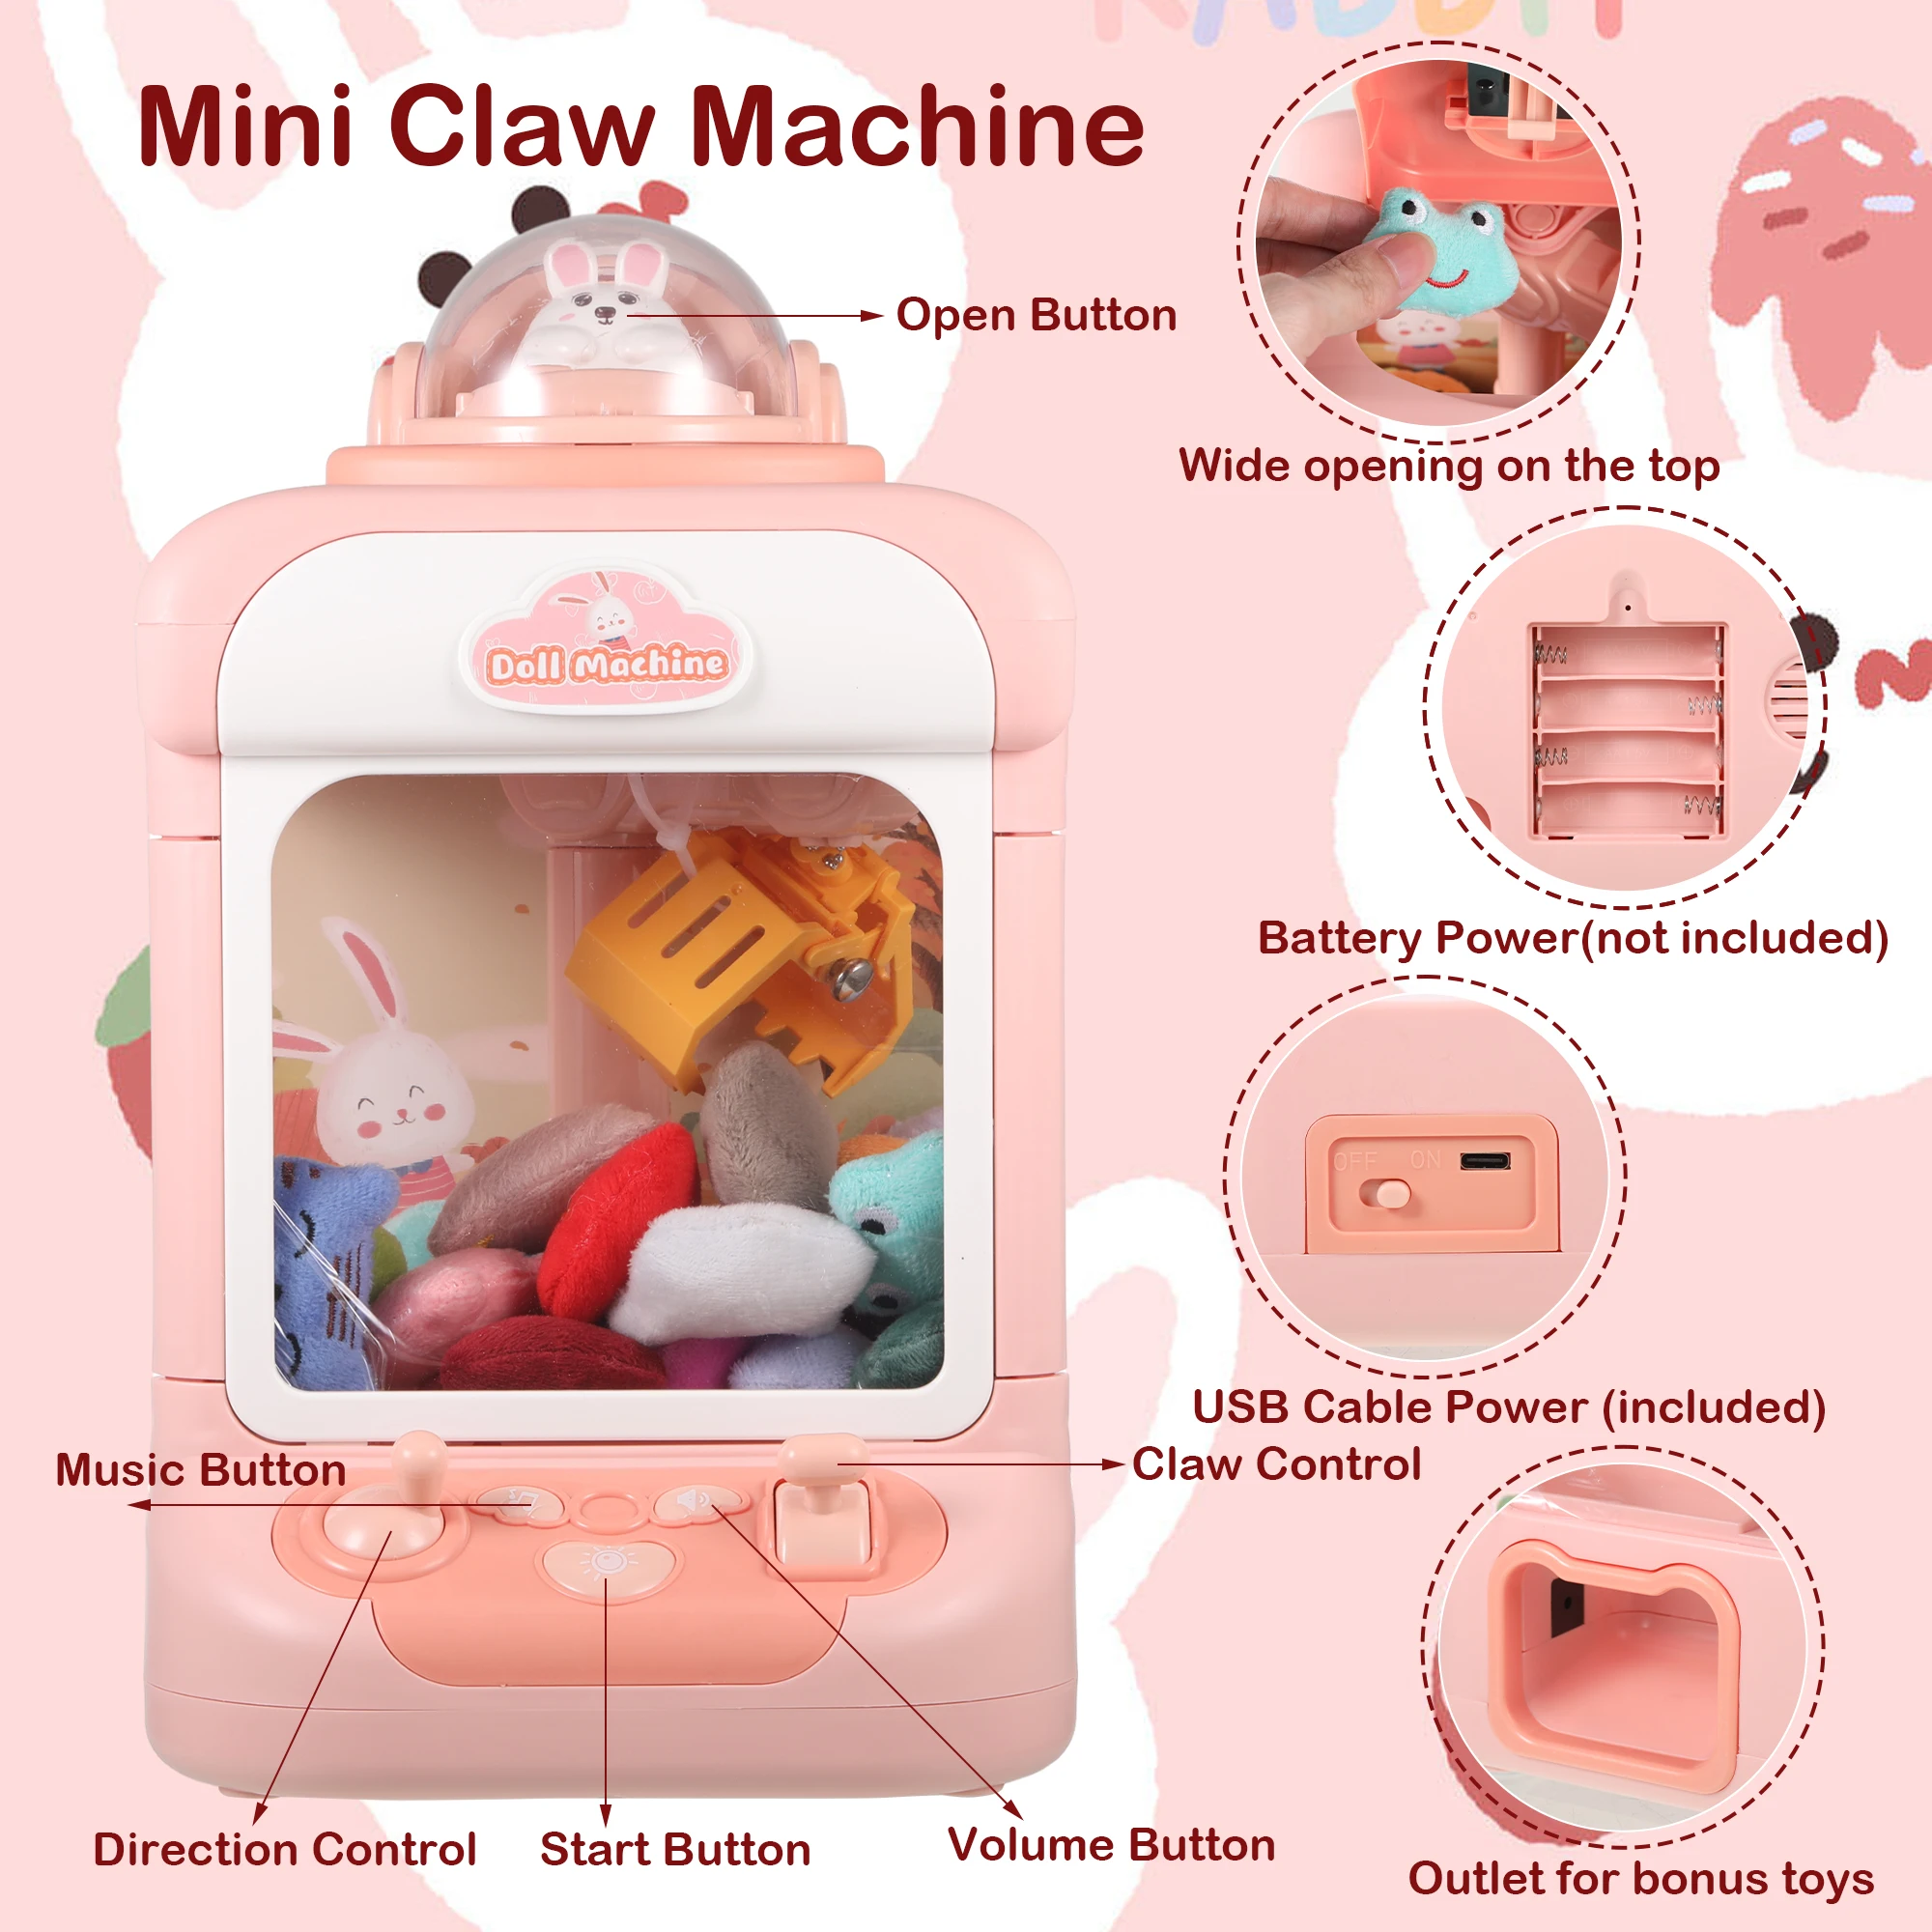 

ABS Exciting Toy Machine For Kids Enhances Cognitive Development Suitable For Young Children